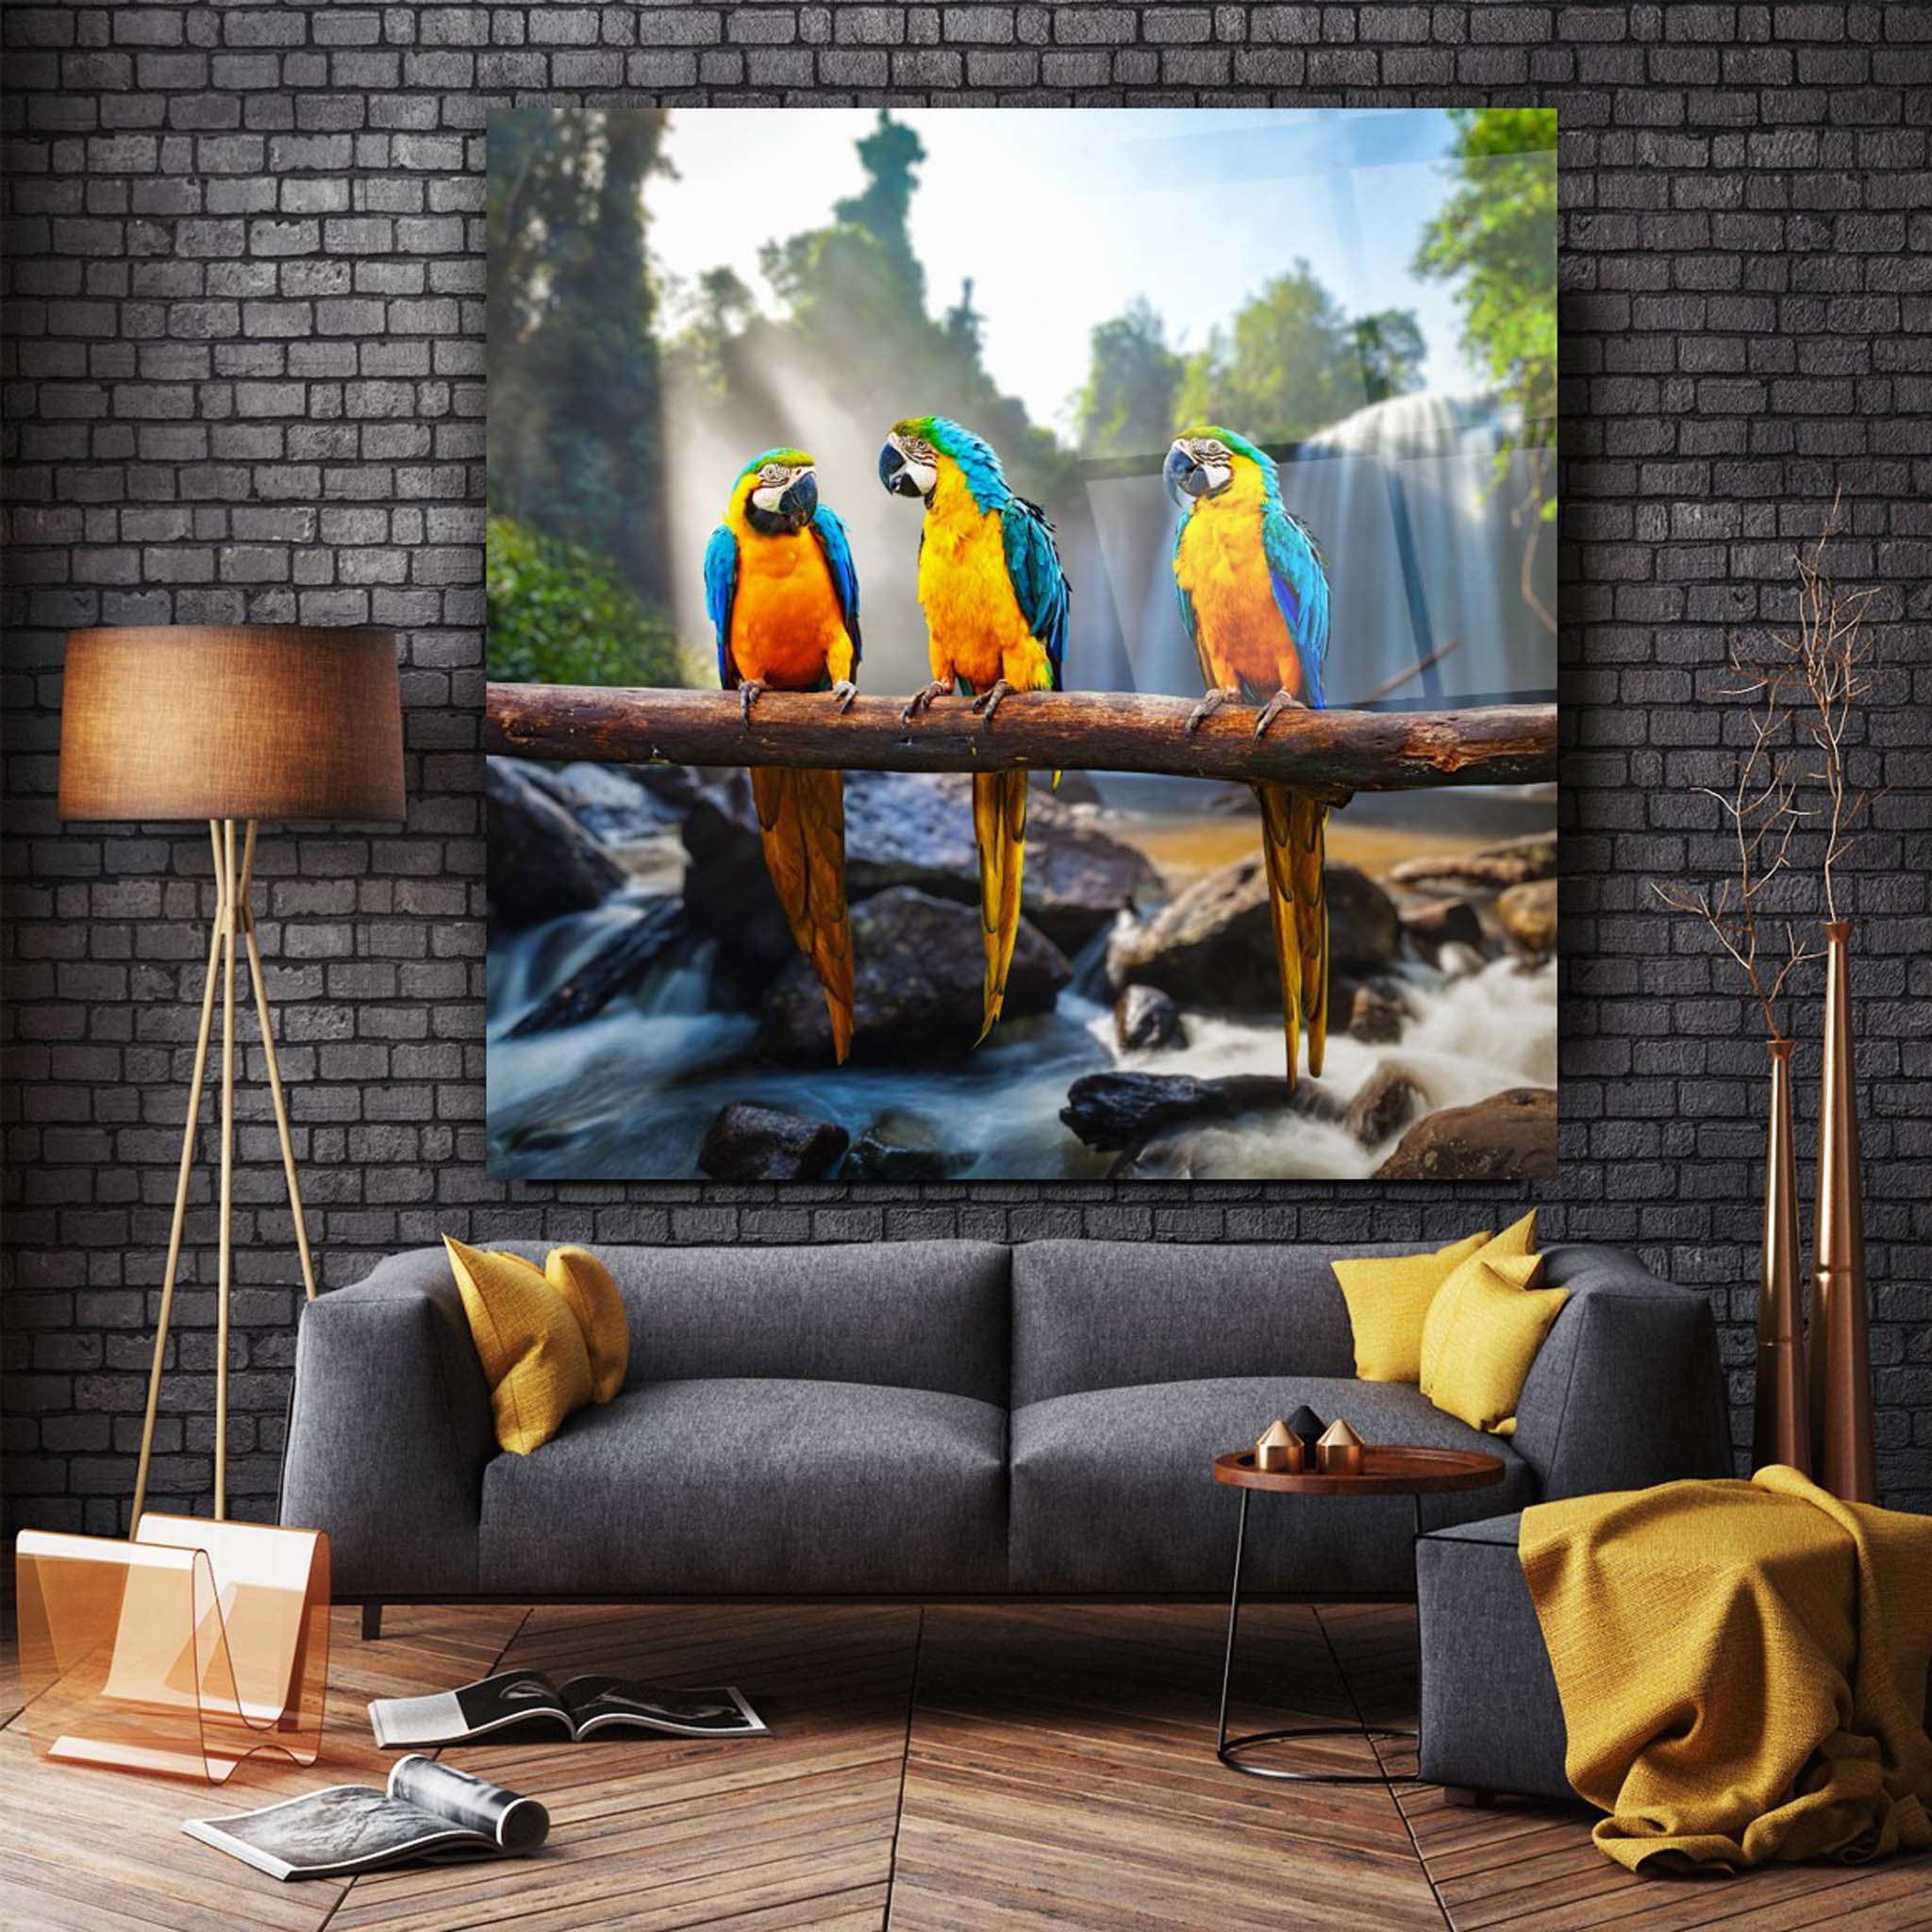 Colorful Parrots Glass Wall Art